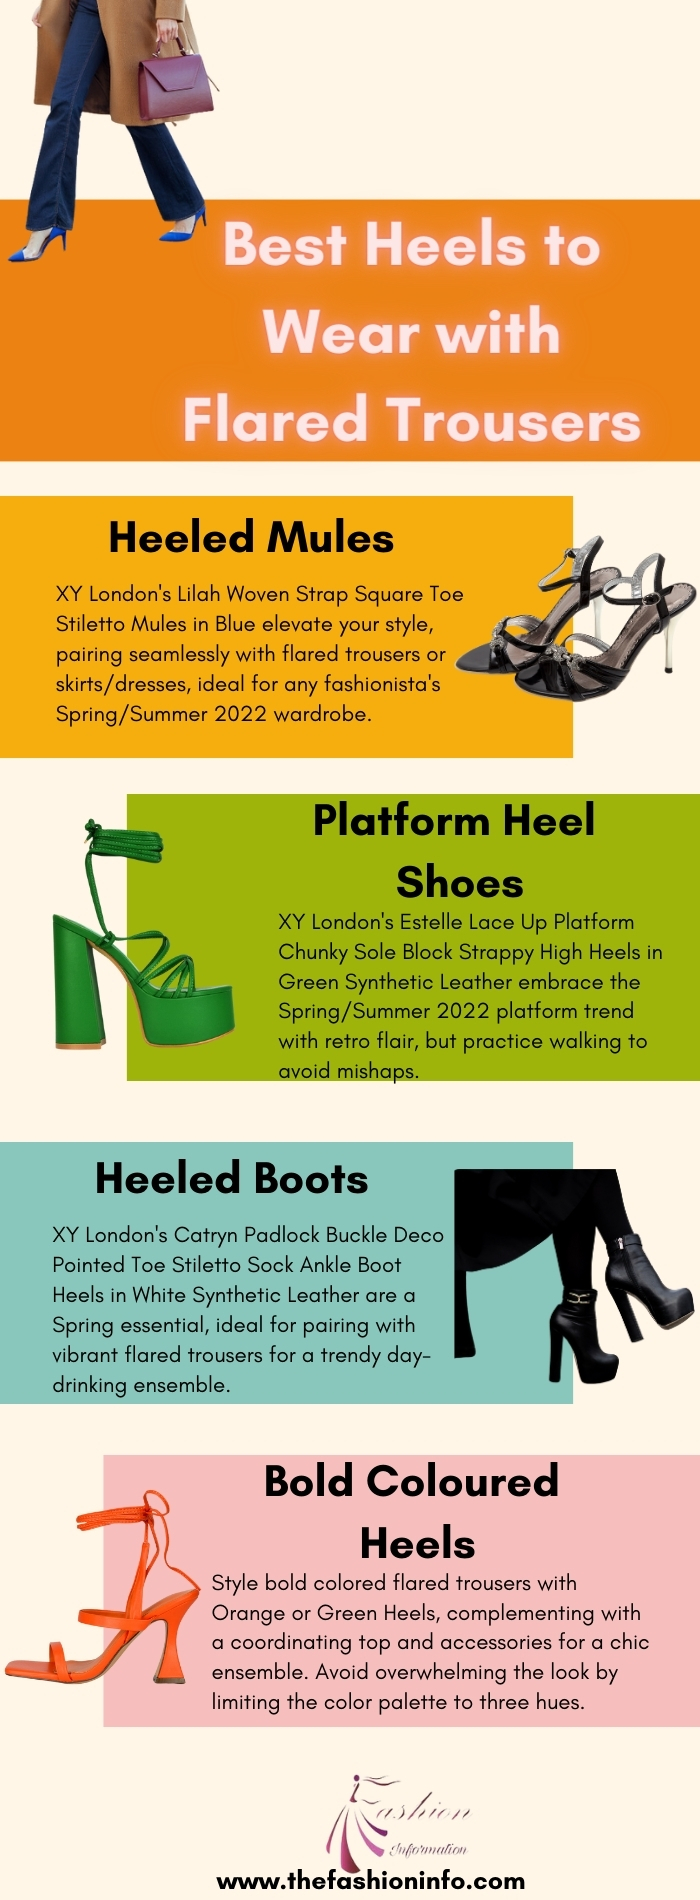 Best Heels to Wear with Flared Trousers